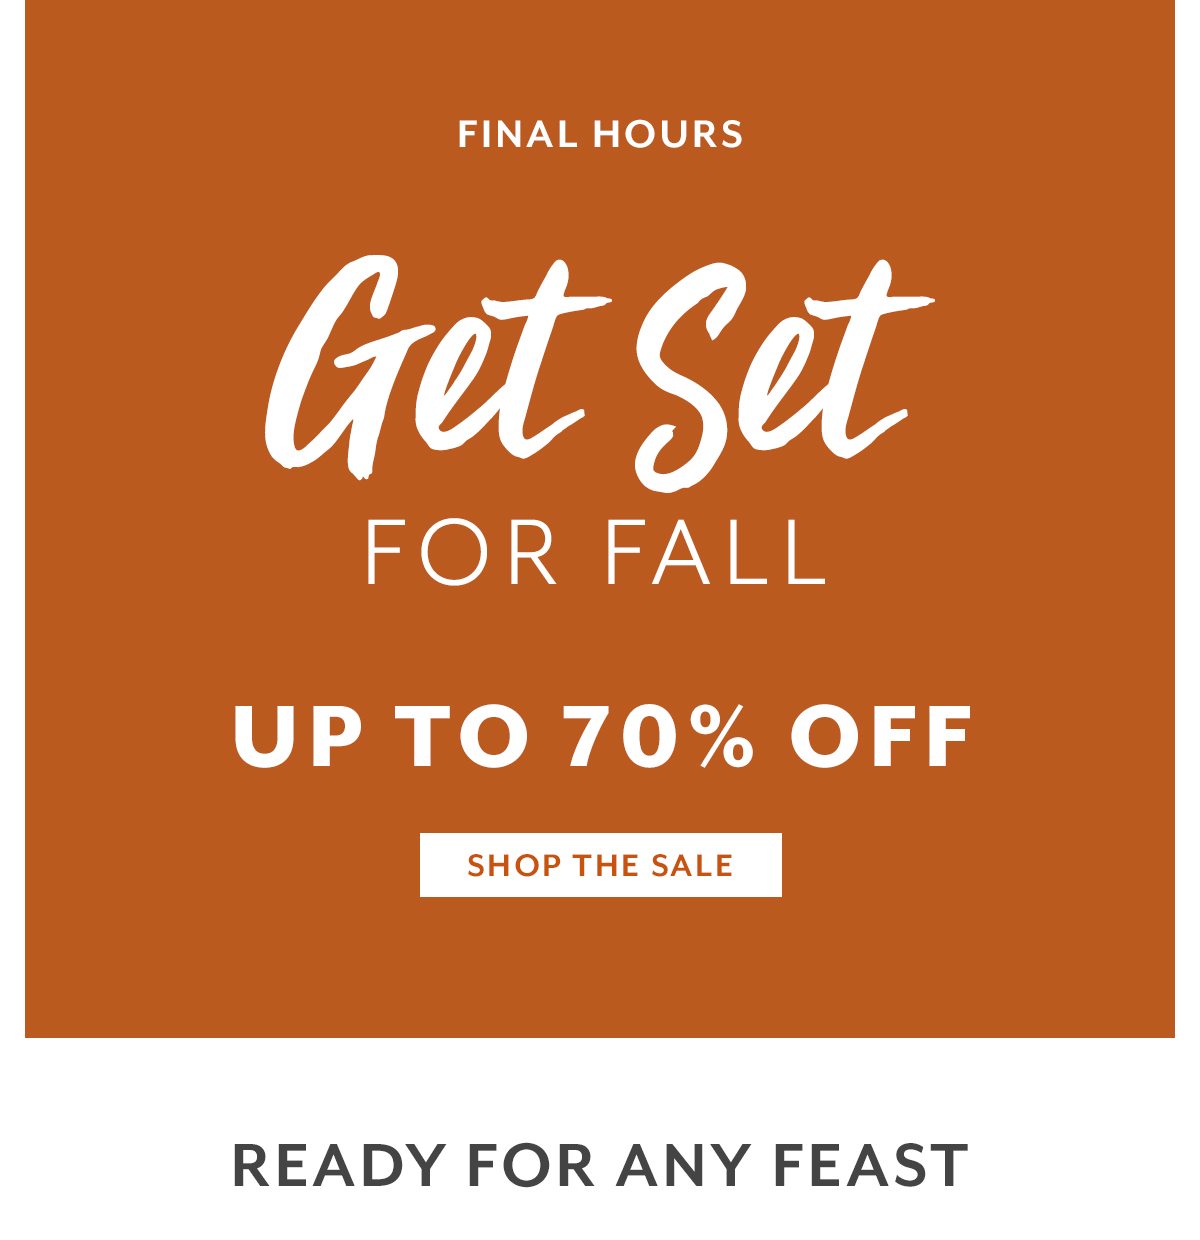 Get Set for Fall